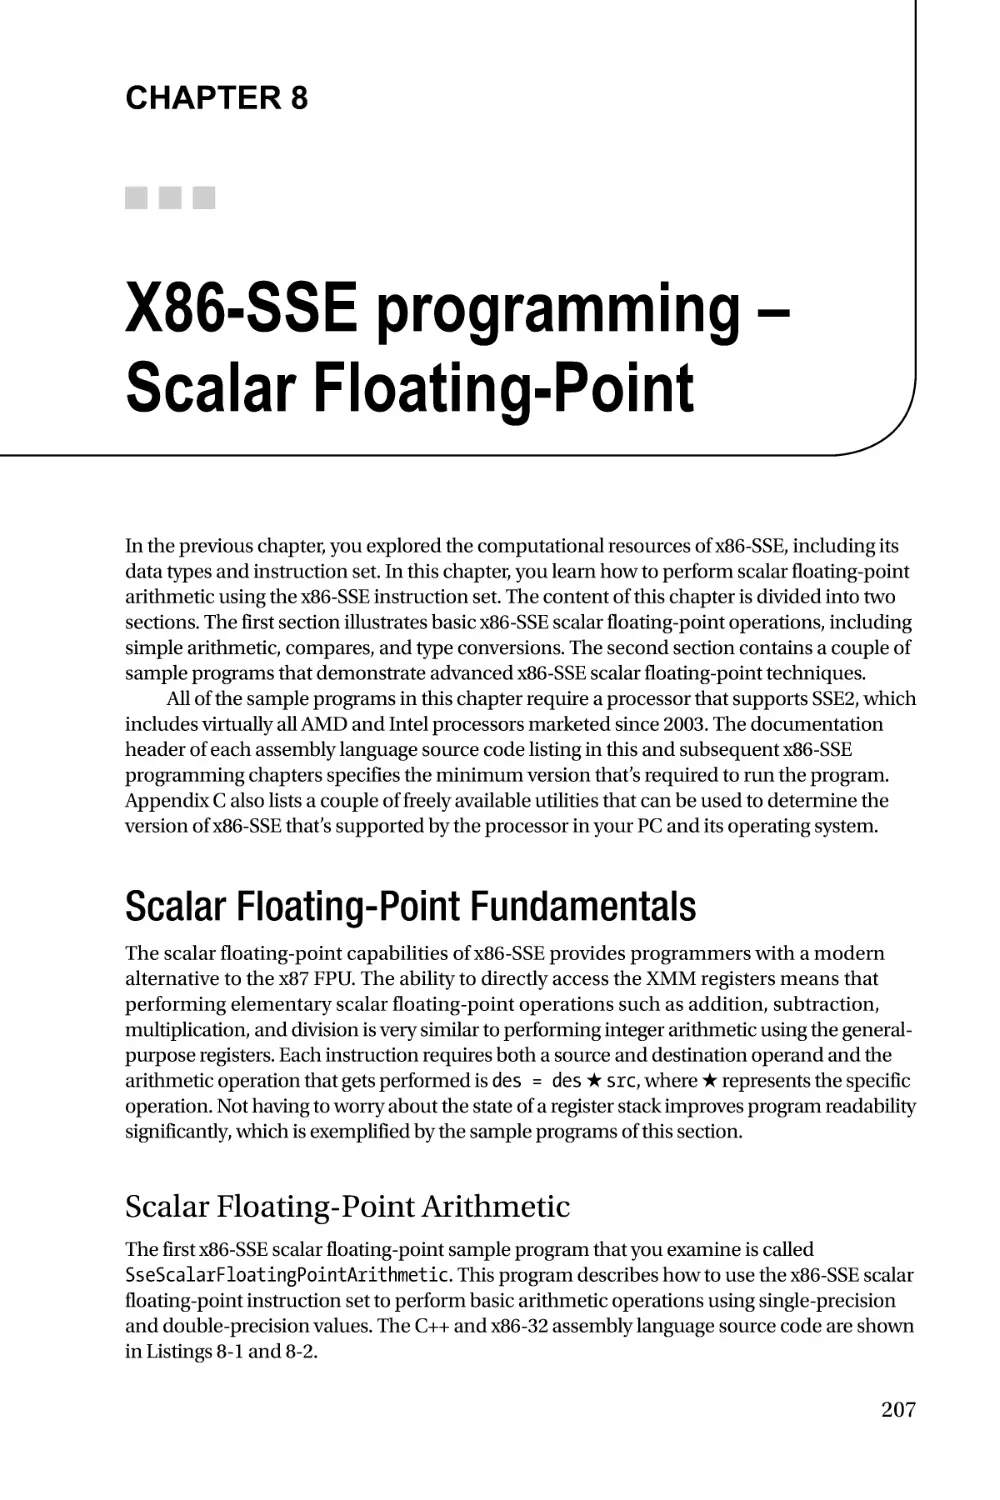 Chapter 8
Scalar Floating-Point Fundamentals
Scalar Floating-Point Arithmetic